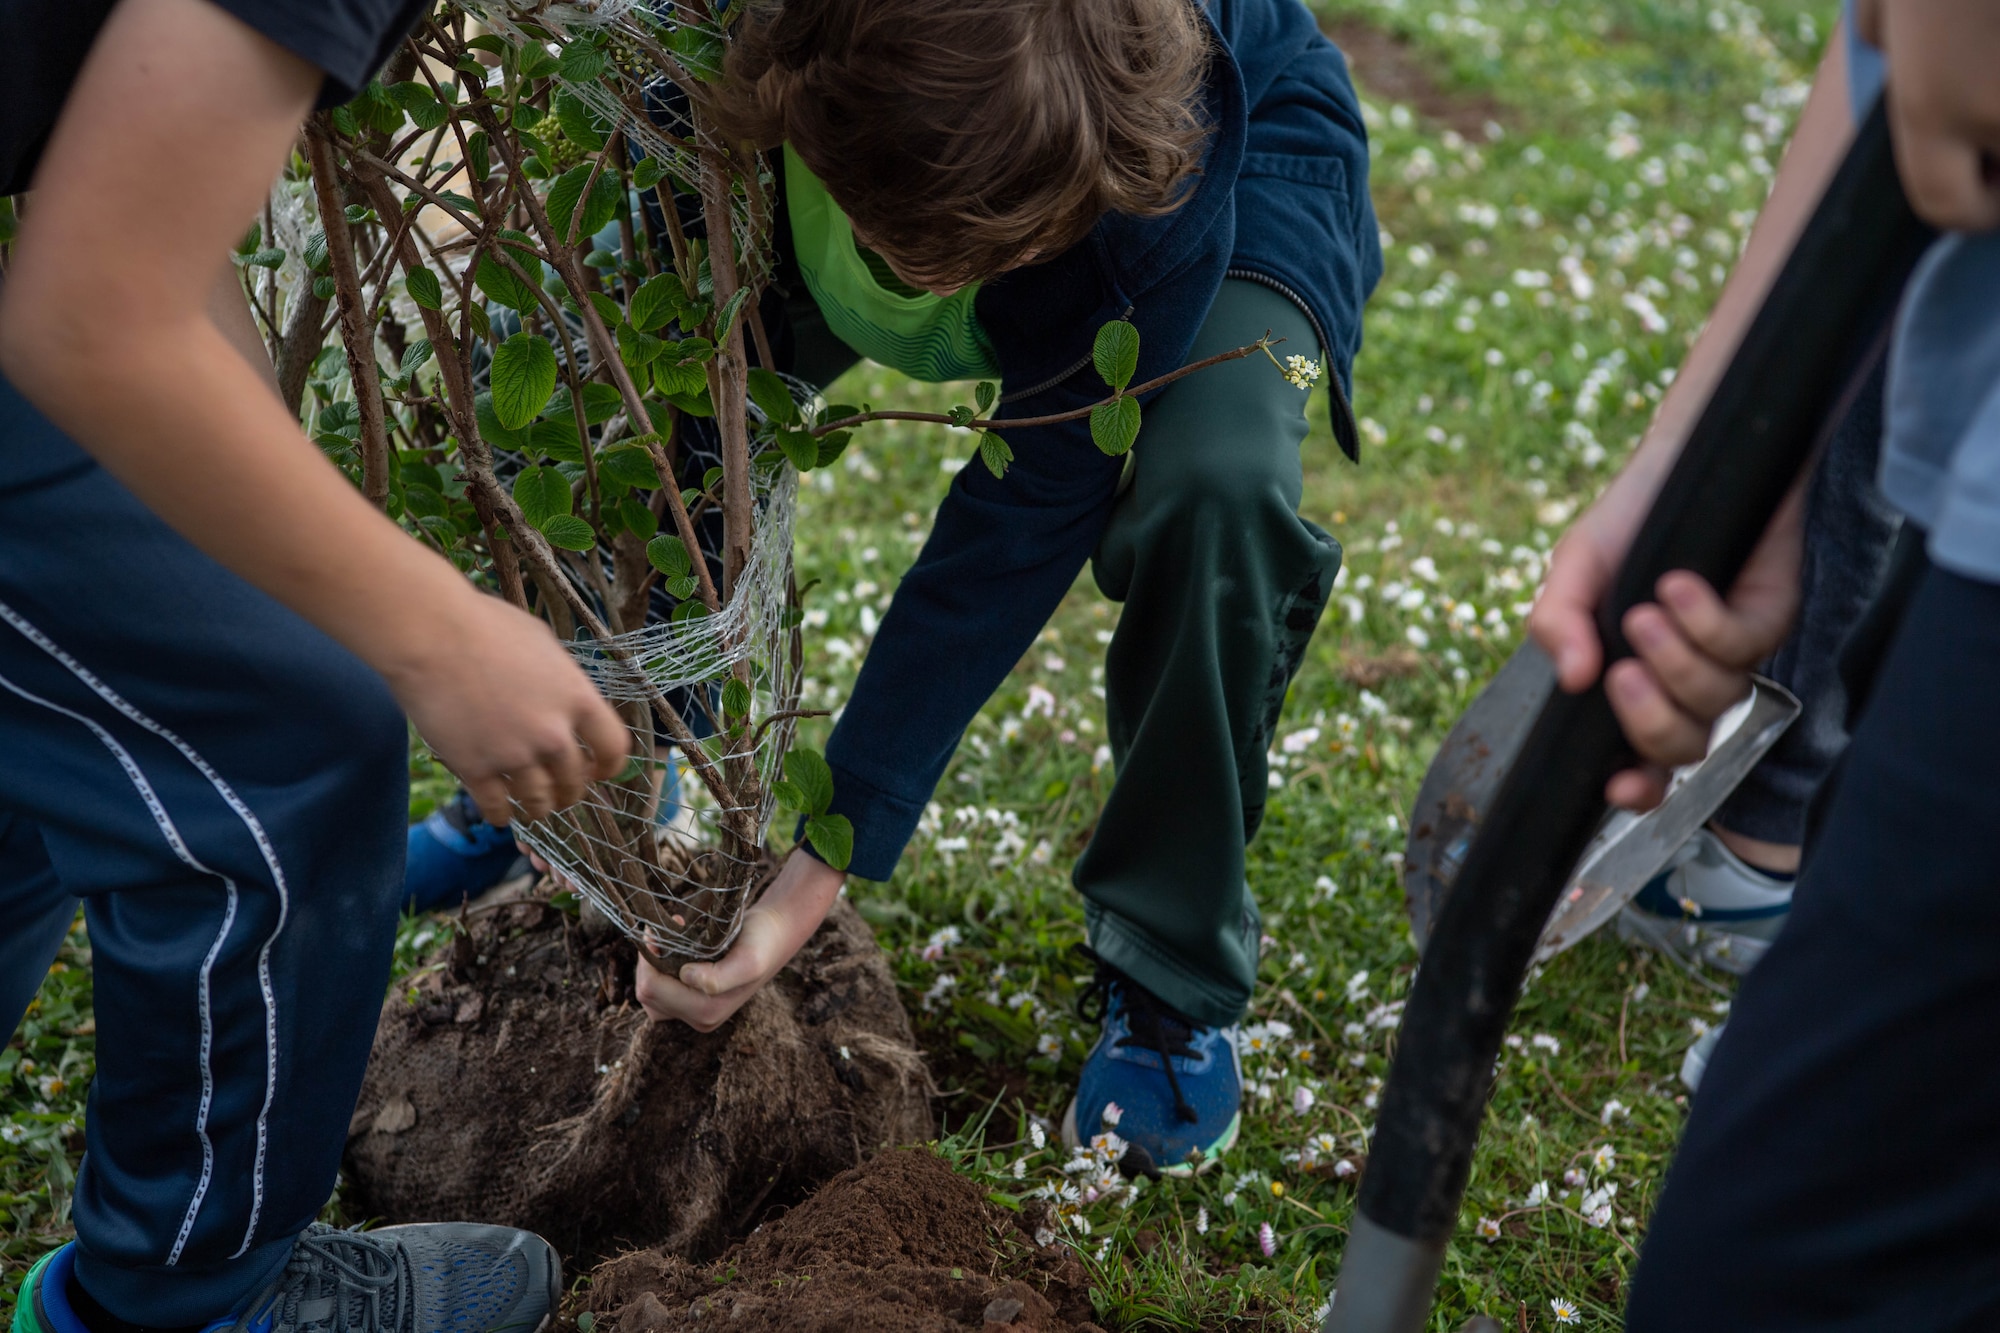 Fifth graders from Kaiserslautern Elementary School place a tree into soil during a tree planting event, at Vogelweh Military Complex, Germany, April 26, 2022. The students worked together to lift and carry the tree over to the hole before covering it with soil. (U.S. Air Force photo by Airman 1st Class Jordan Lazaro)